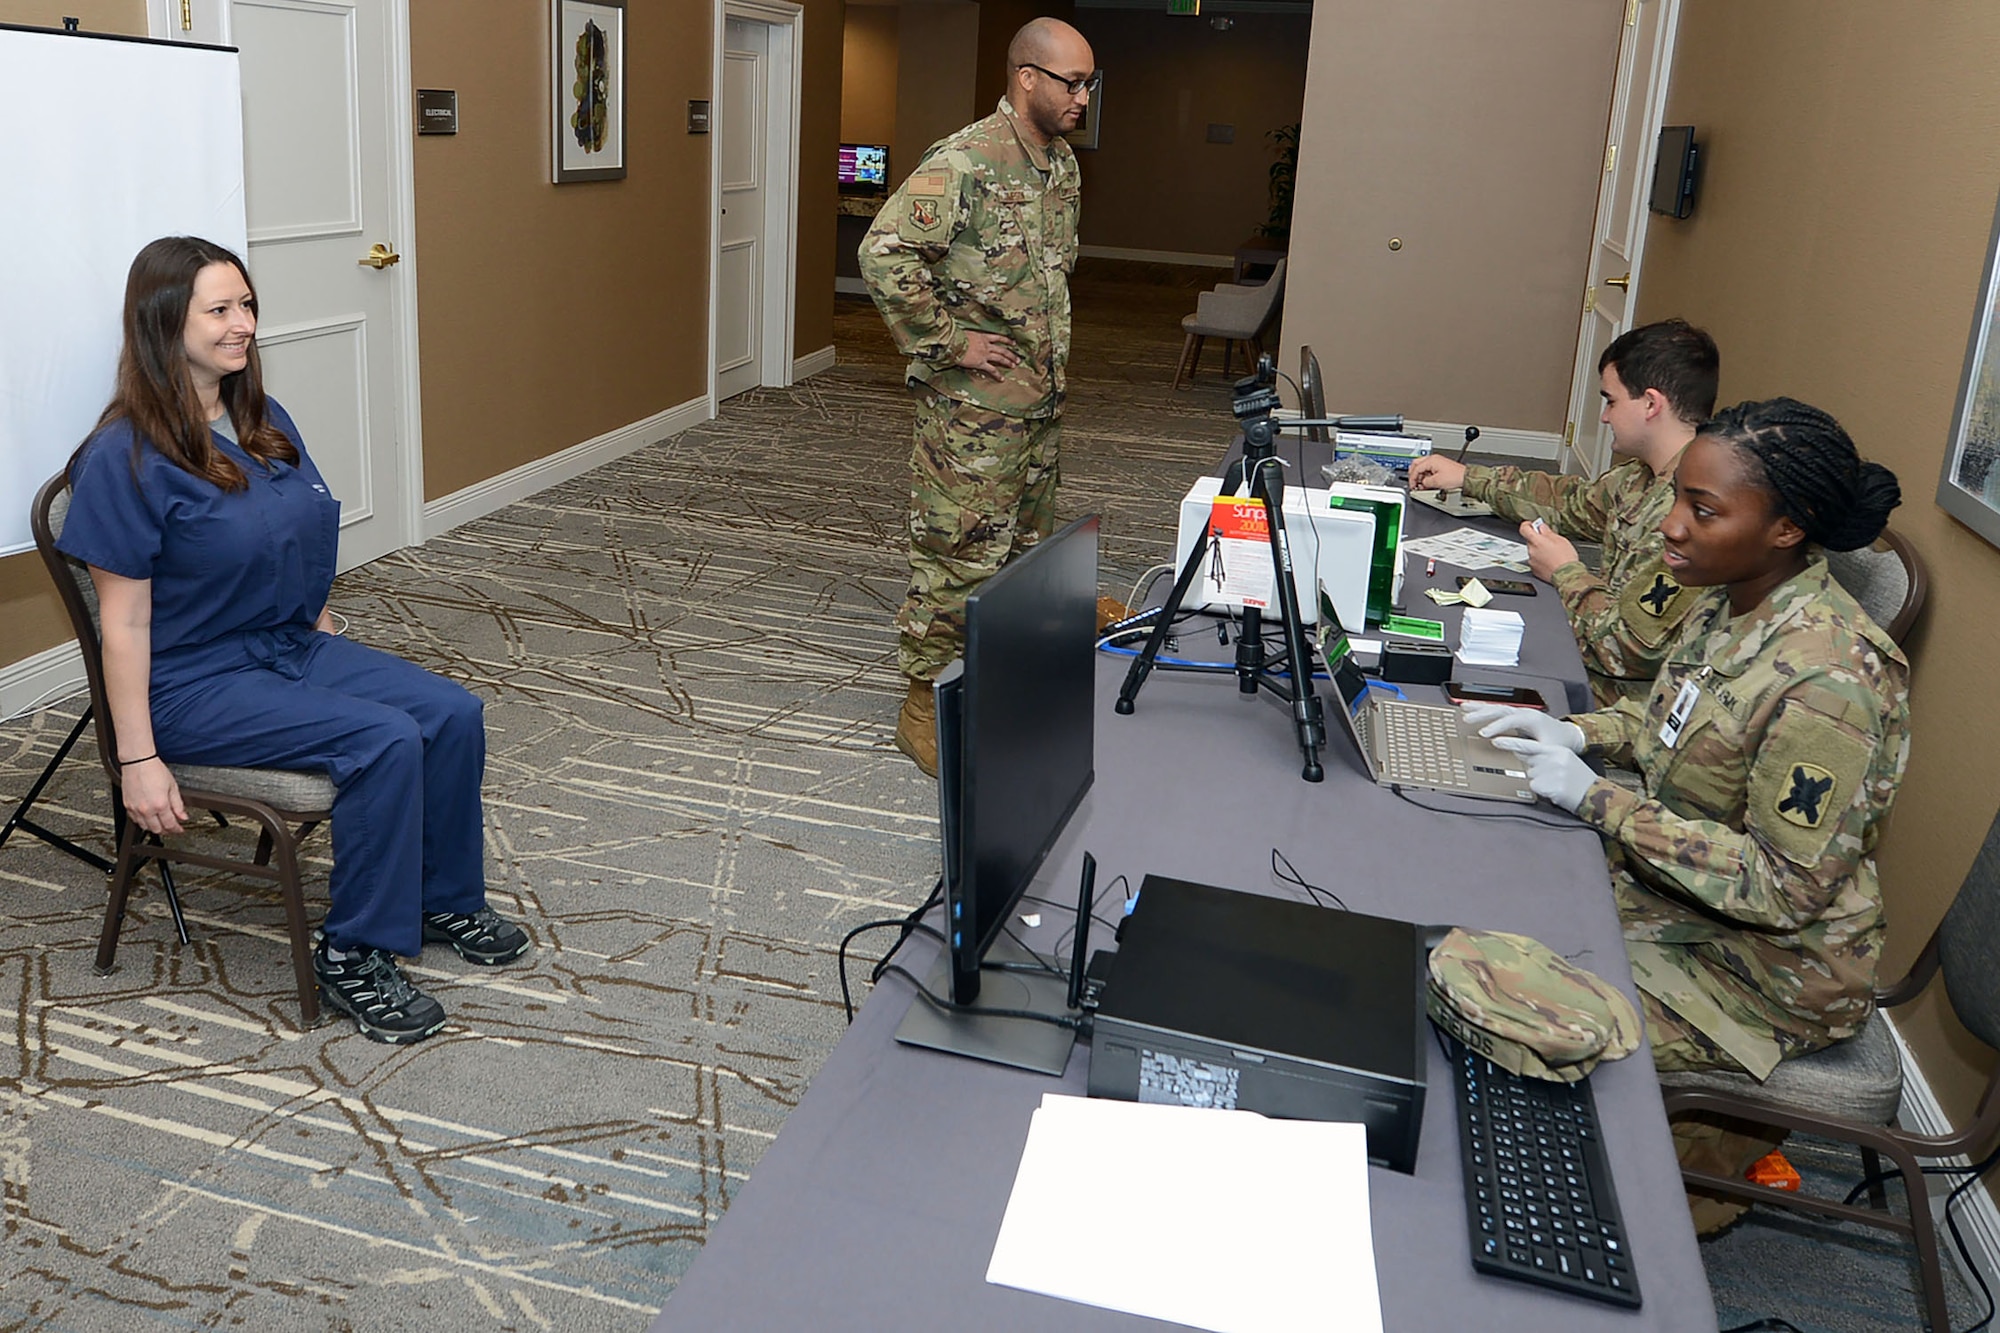 Spc. Shunterika Fields and Army Pvt. Stephen Hines create ID cards to track non-patient personnel’s temperatures at the temporary medical facility in New Orleans, April 4.